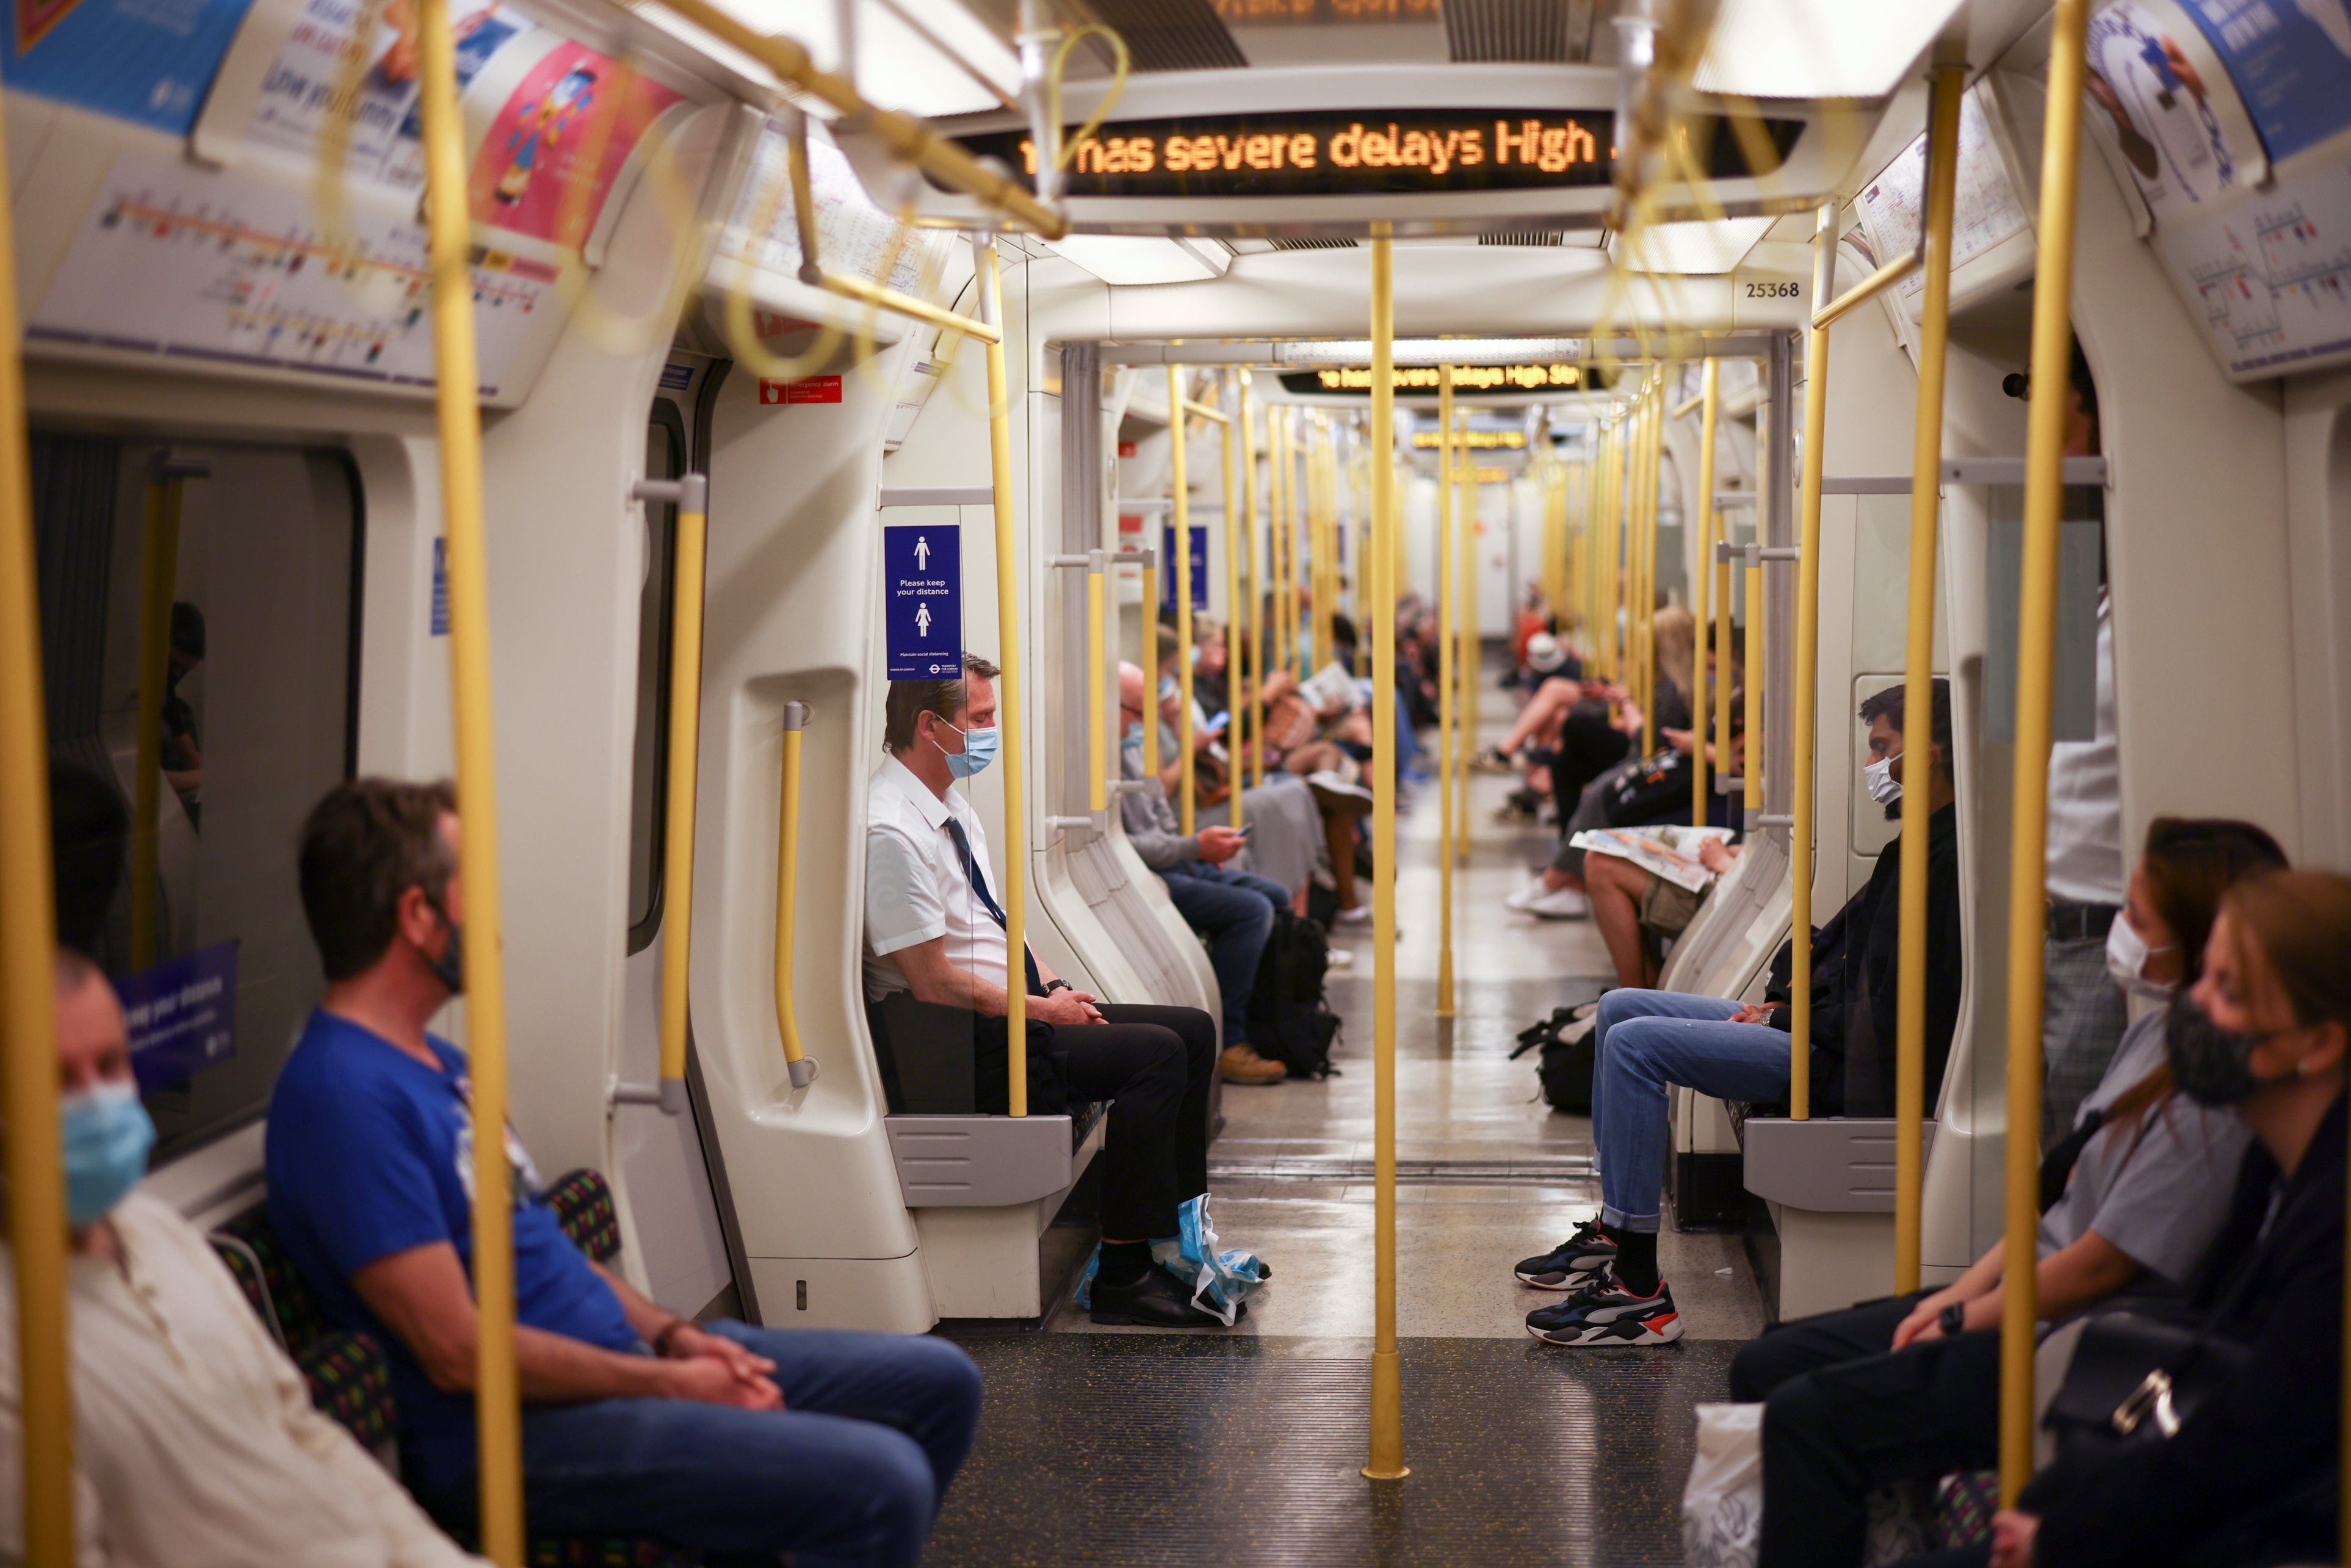 Soon Londoners will be able to chat the phone while on the tube